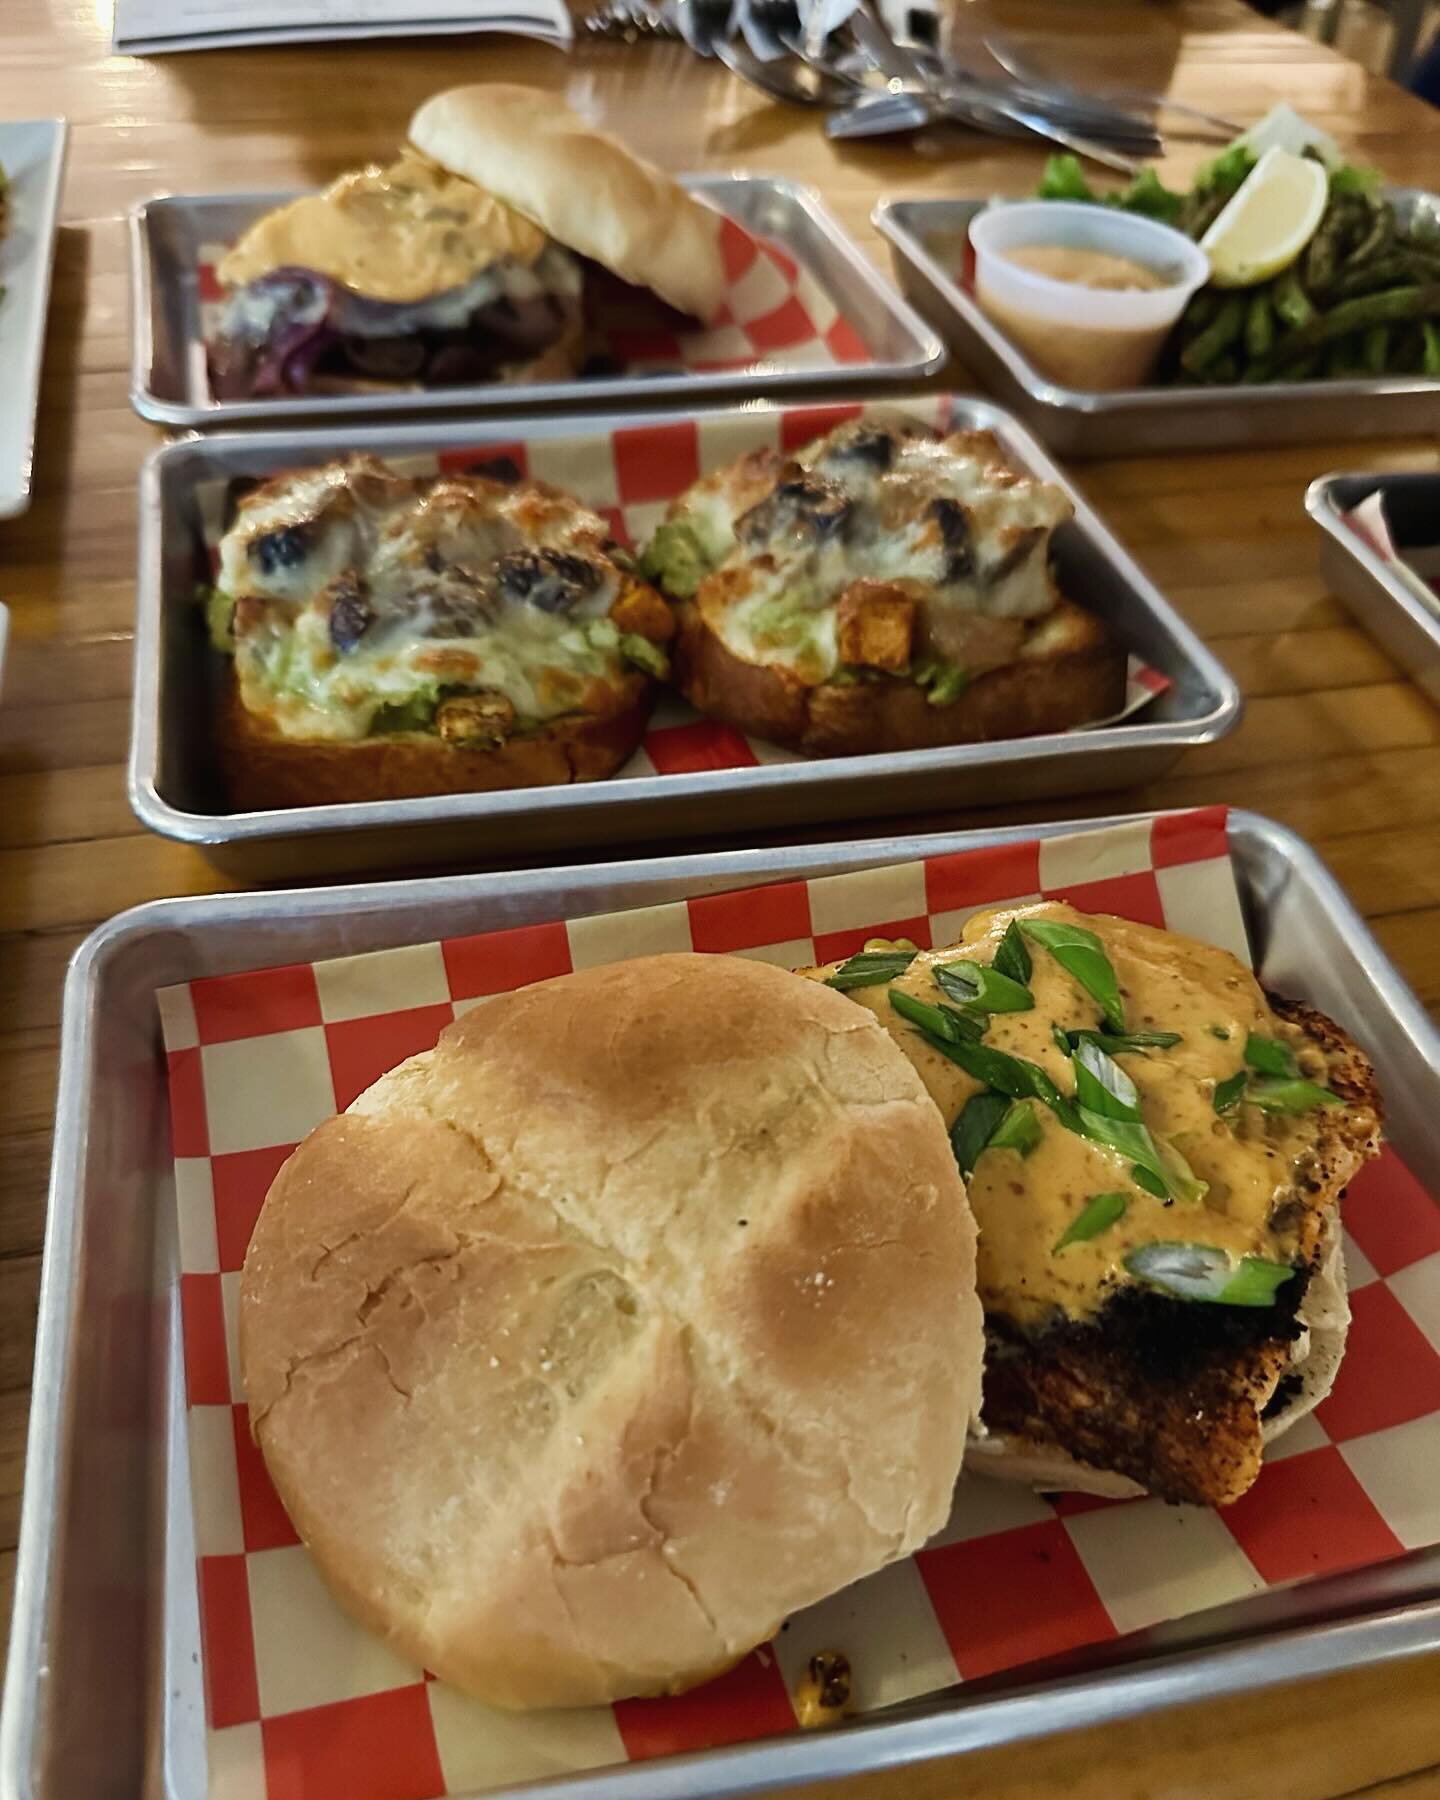 You may have tried our burgers, but how about our sandwiches? #friedchickensandwich #grilledsalmon #mushroom #bbqchicken #crispycod #blackbeanburger #andmore #sandwich es #rosendale #wallkillvalleyrailtrail #newpaltz #kingston #outdoordining #veggiem